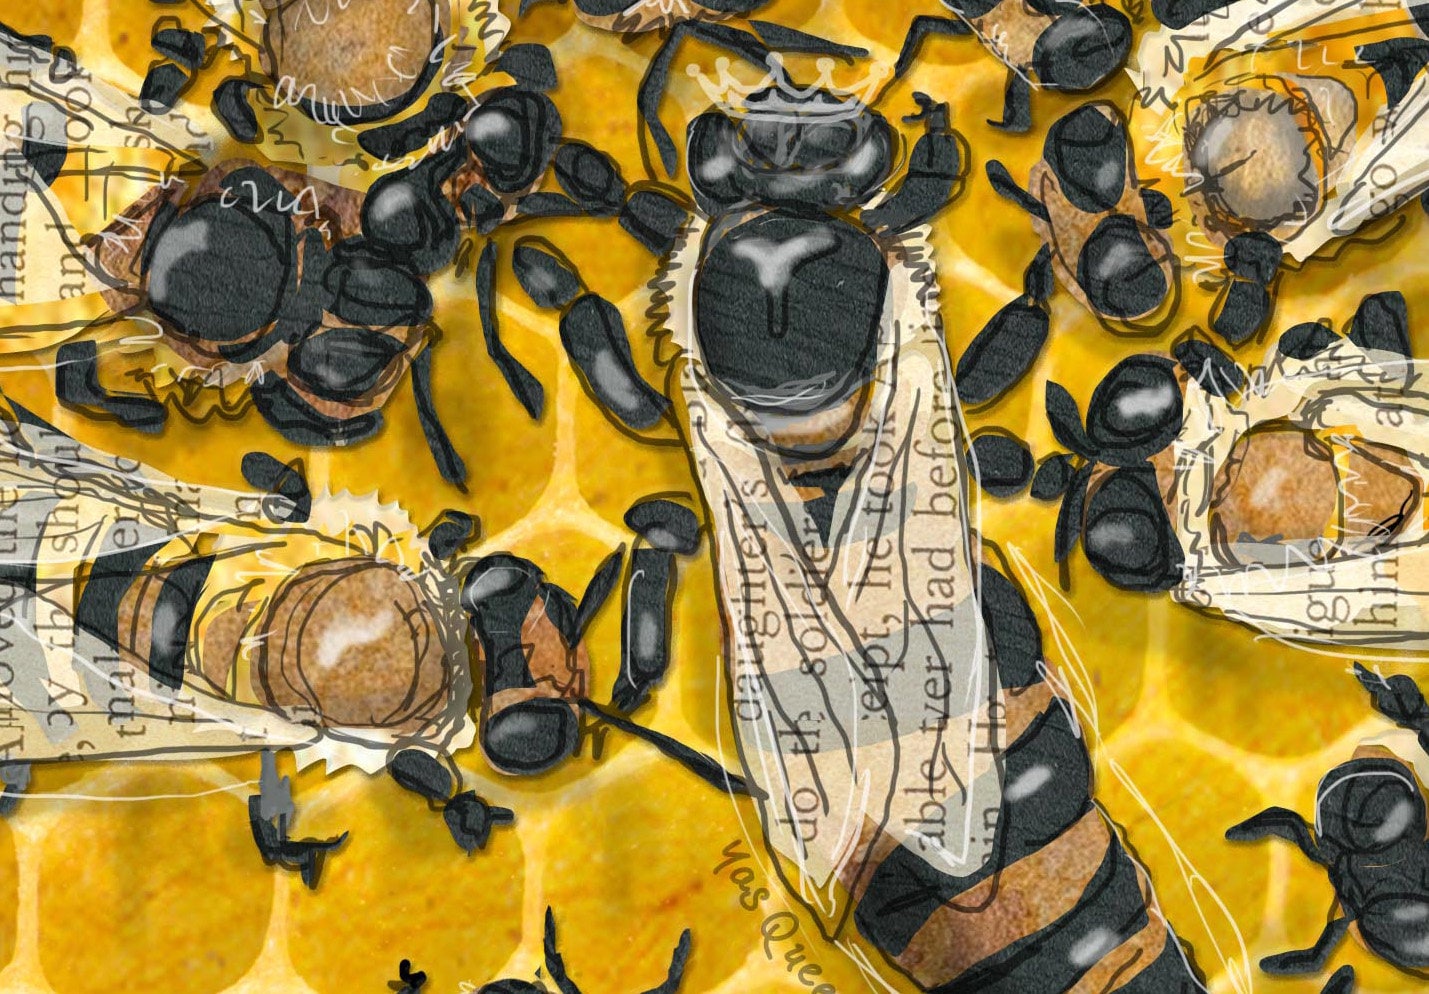 8x10 Art Print of a mixed media collage of a retinue of honeybee workers surrounding the queen, inspirational quote, women helping women